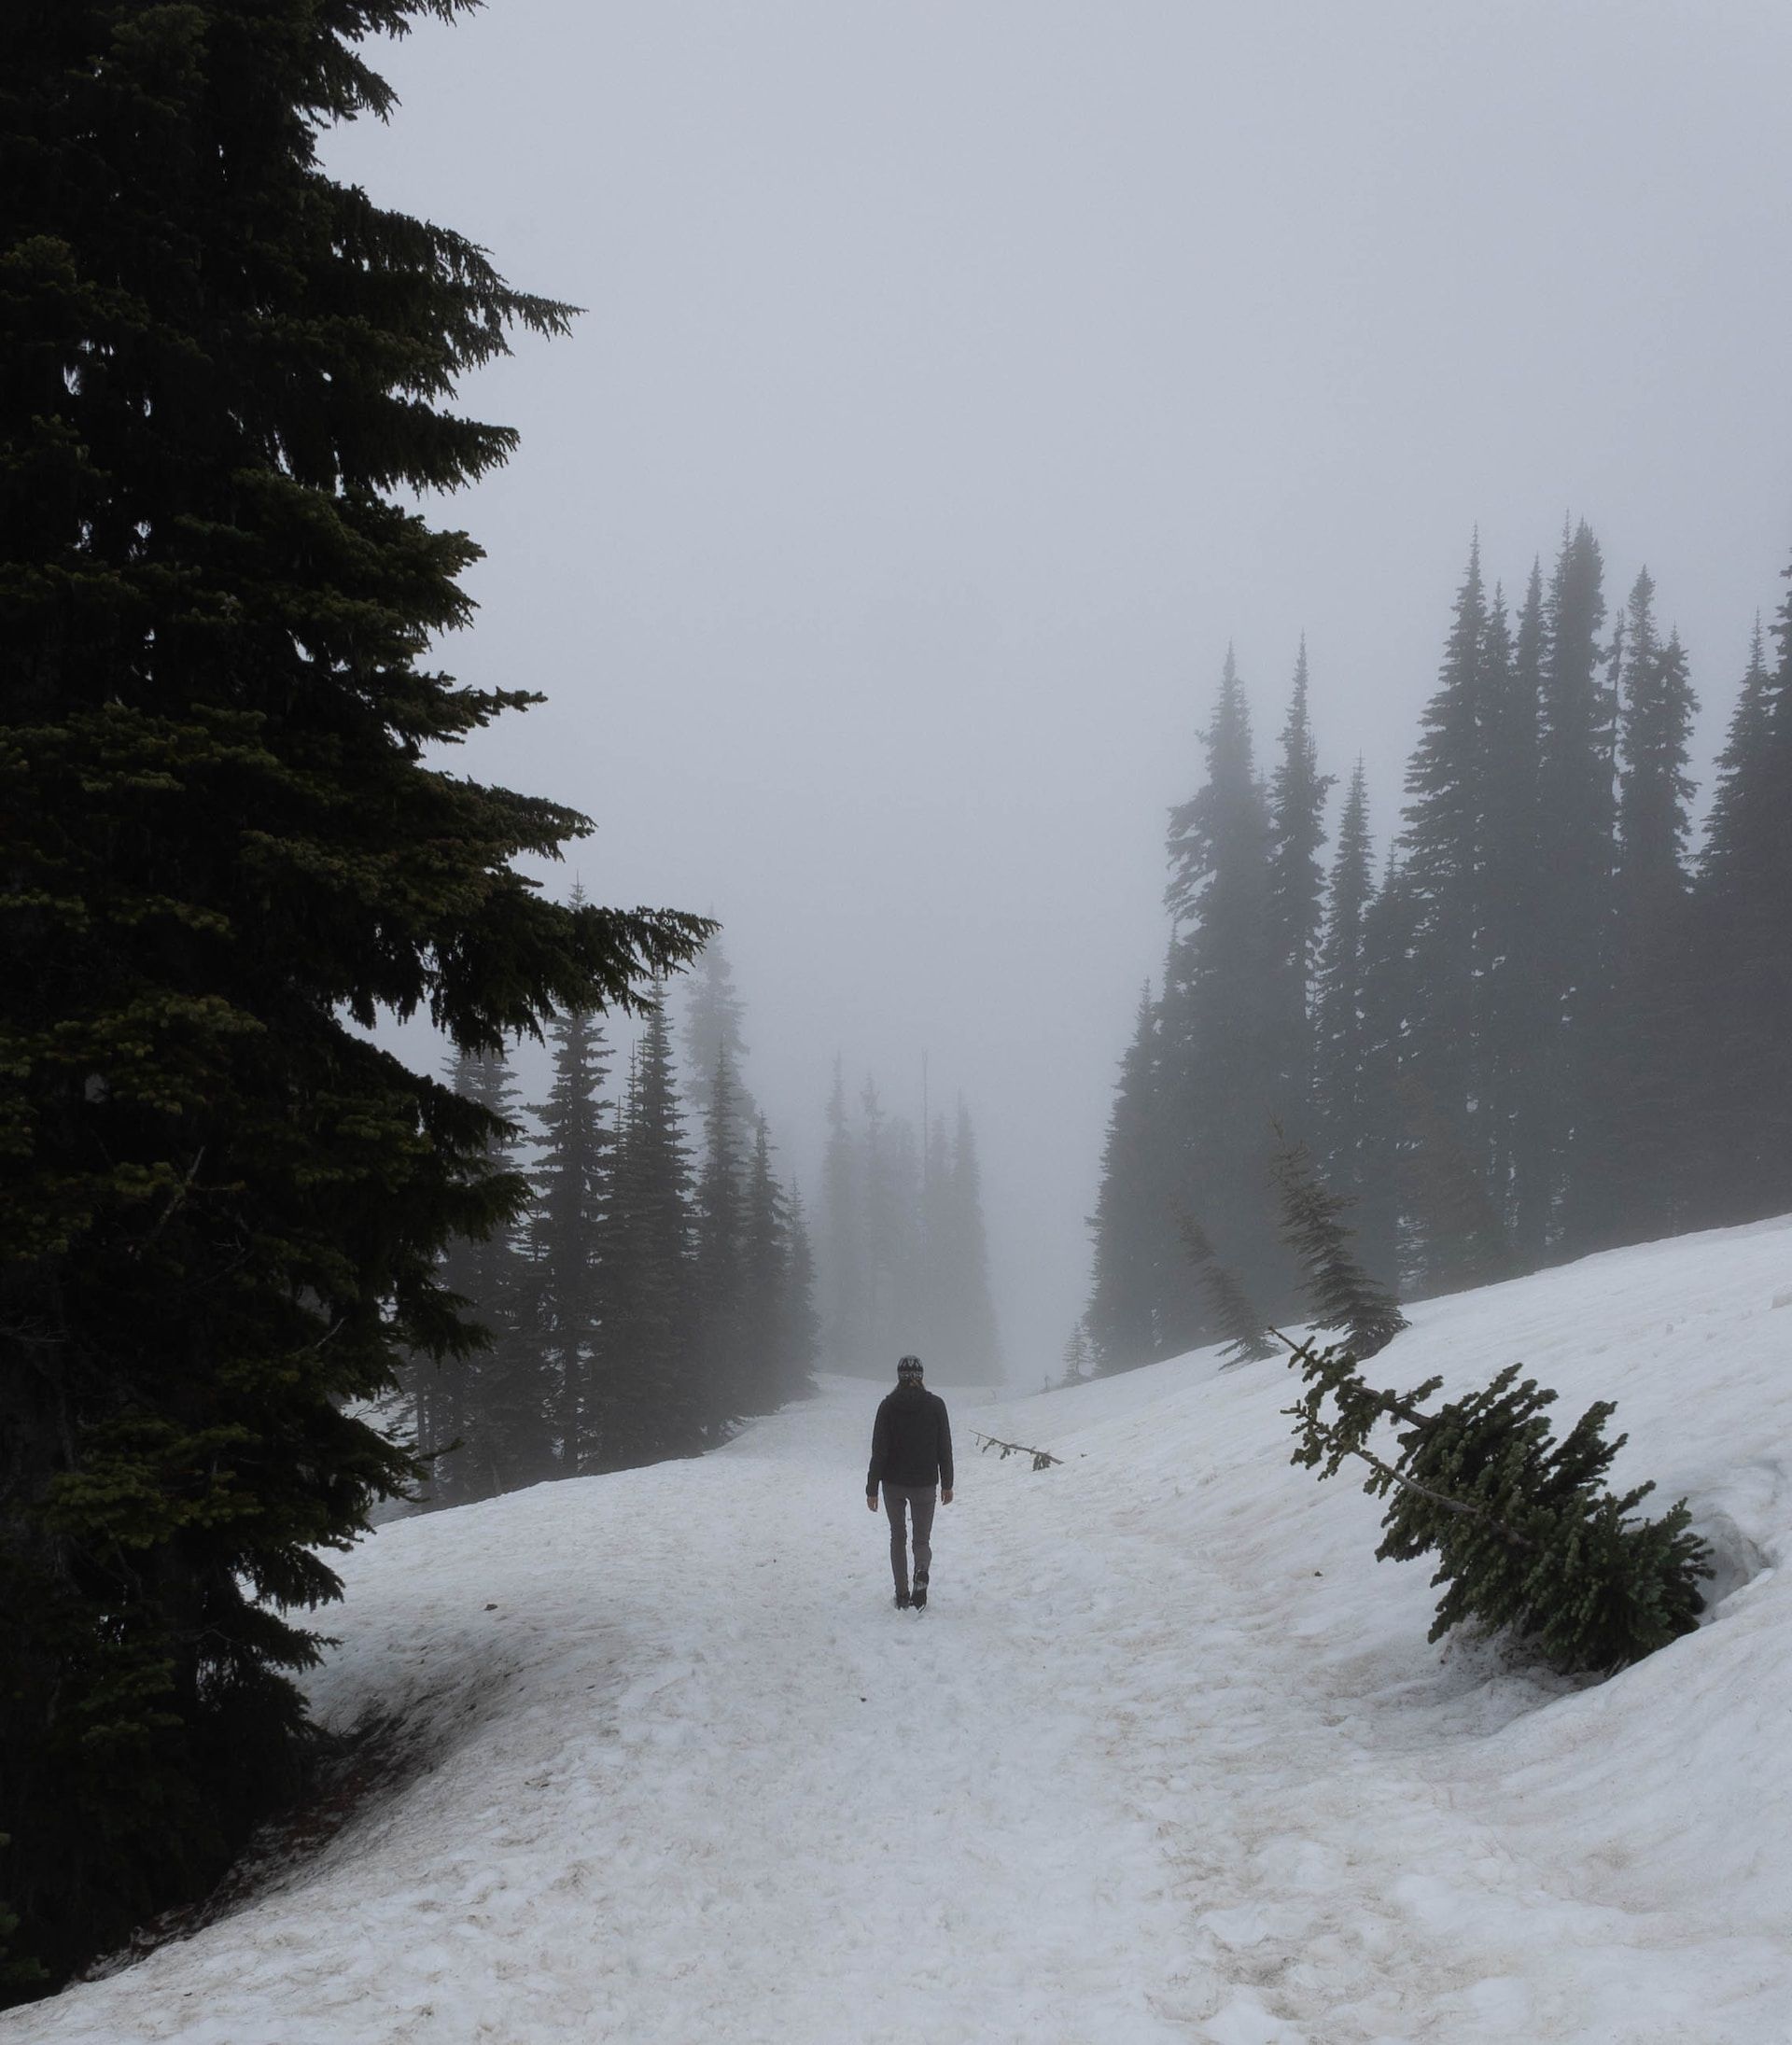 Person walking on a snowy path in Mt Rainier National Park